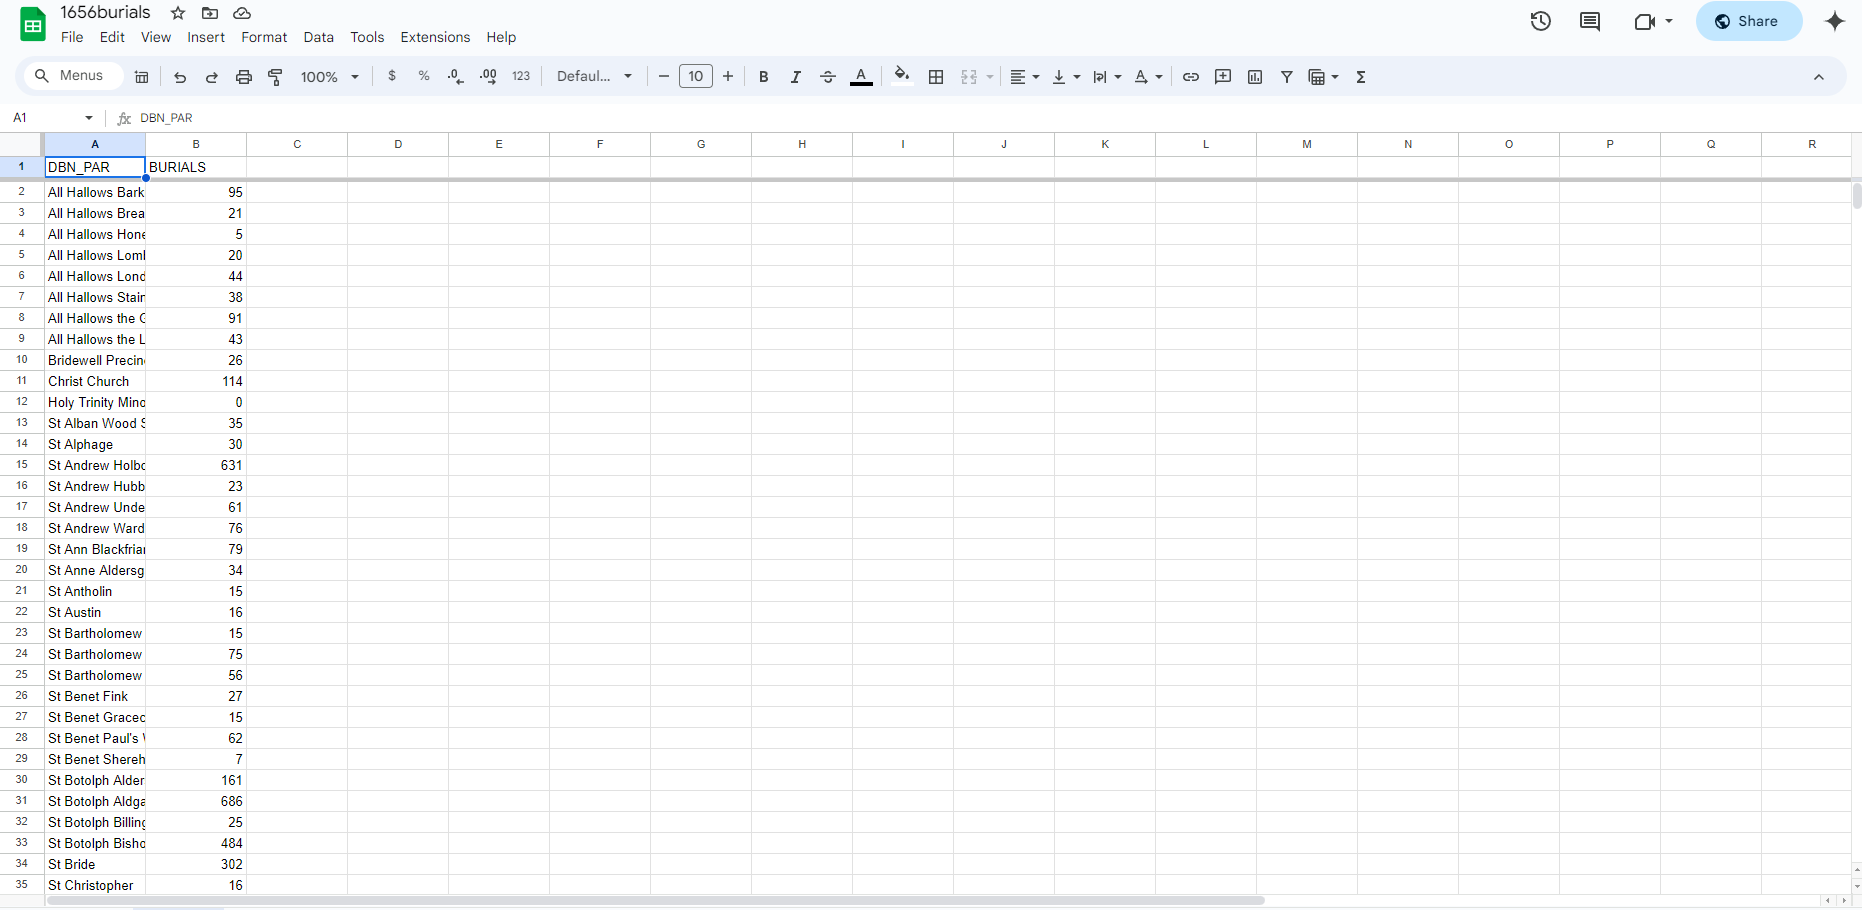  A screenshot of a Google Sheets spreadsheet titled '1656burials' The X-Axis contains two columns, 'DBN_PAR' and 'BURIALS'. The first column includes the names of all parishes in this study, and the second column includes their burial counts for 1656.